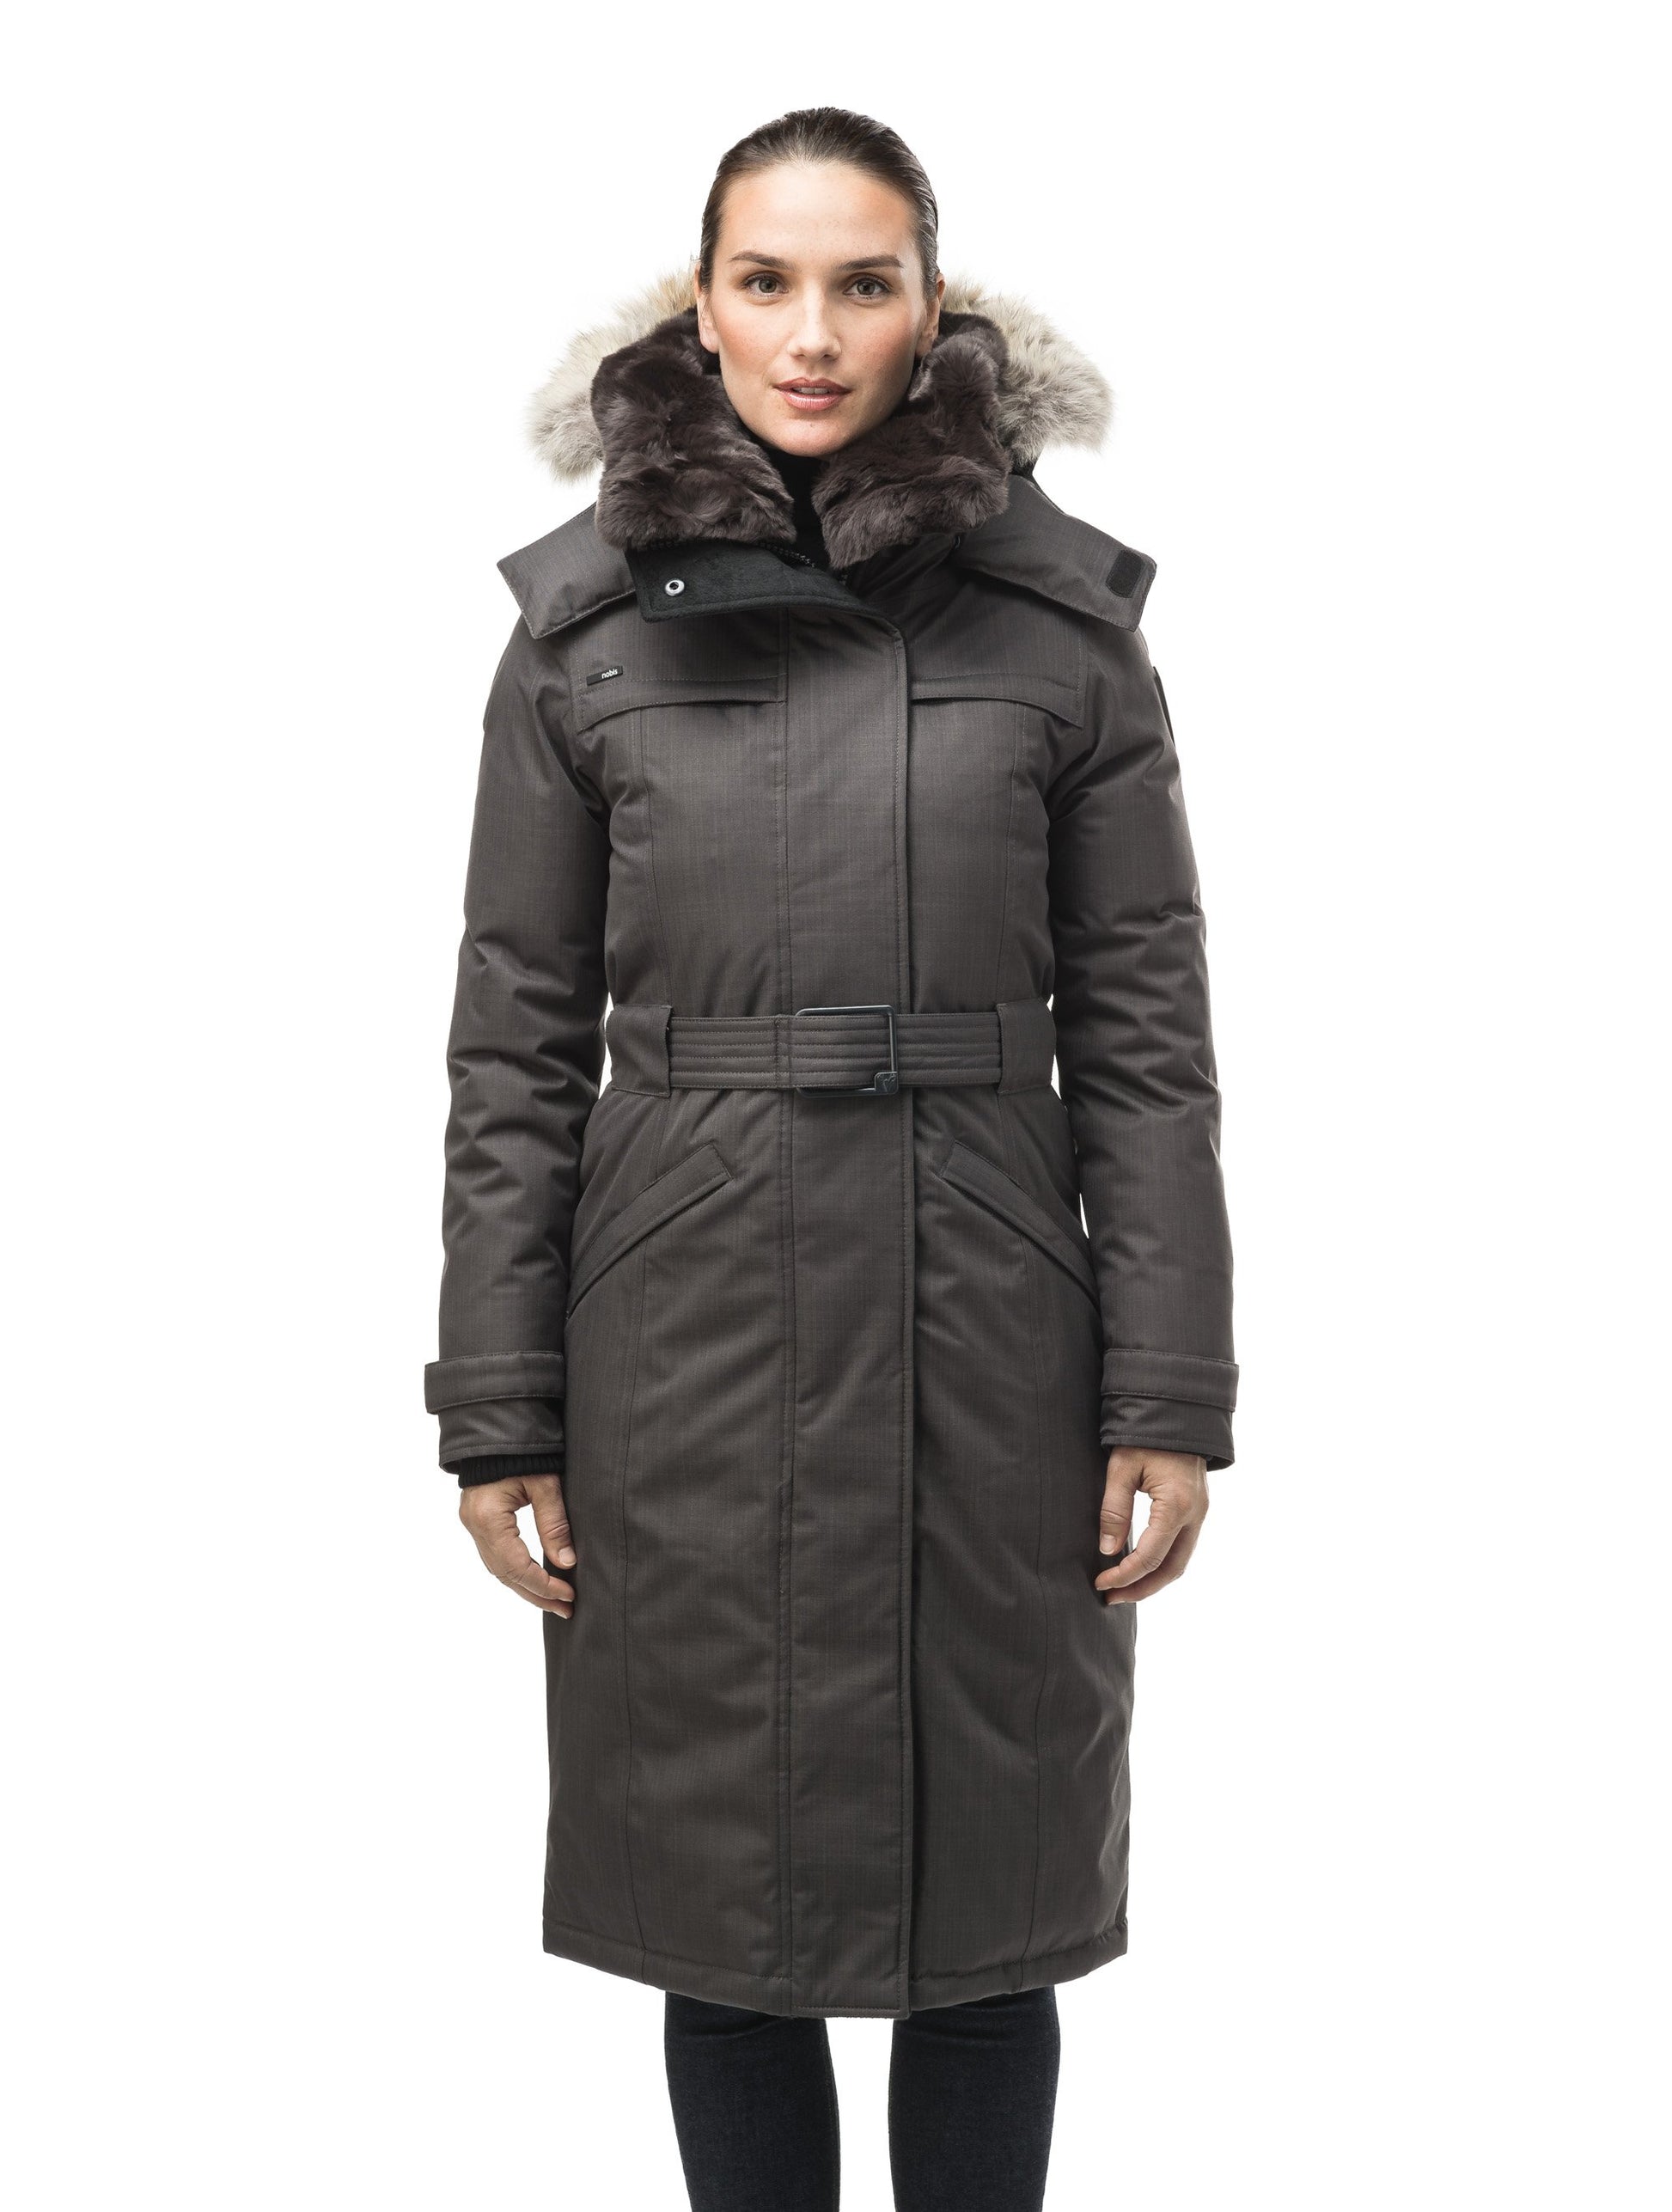 Women's knee length down filled parka with a belted waist and fully removable Coyote and Rex Rabbit fur ruffs in CH Steel Grey